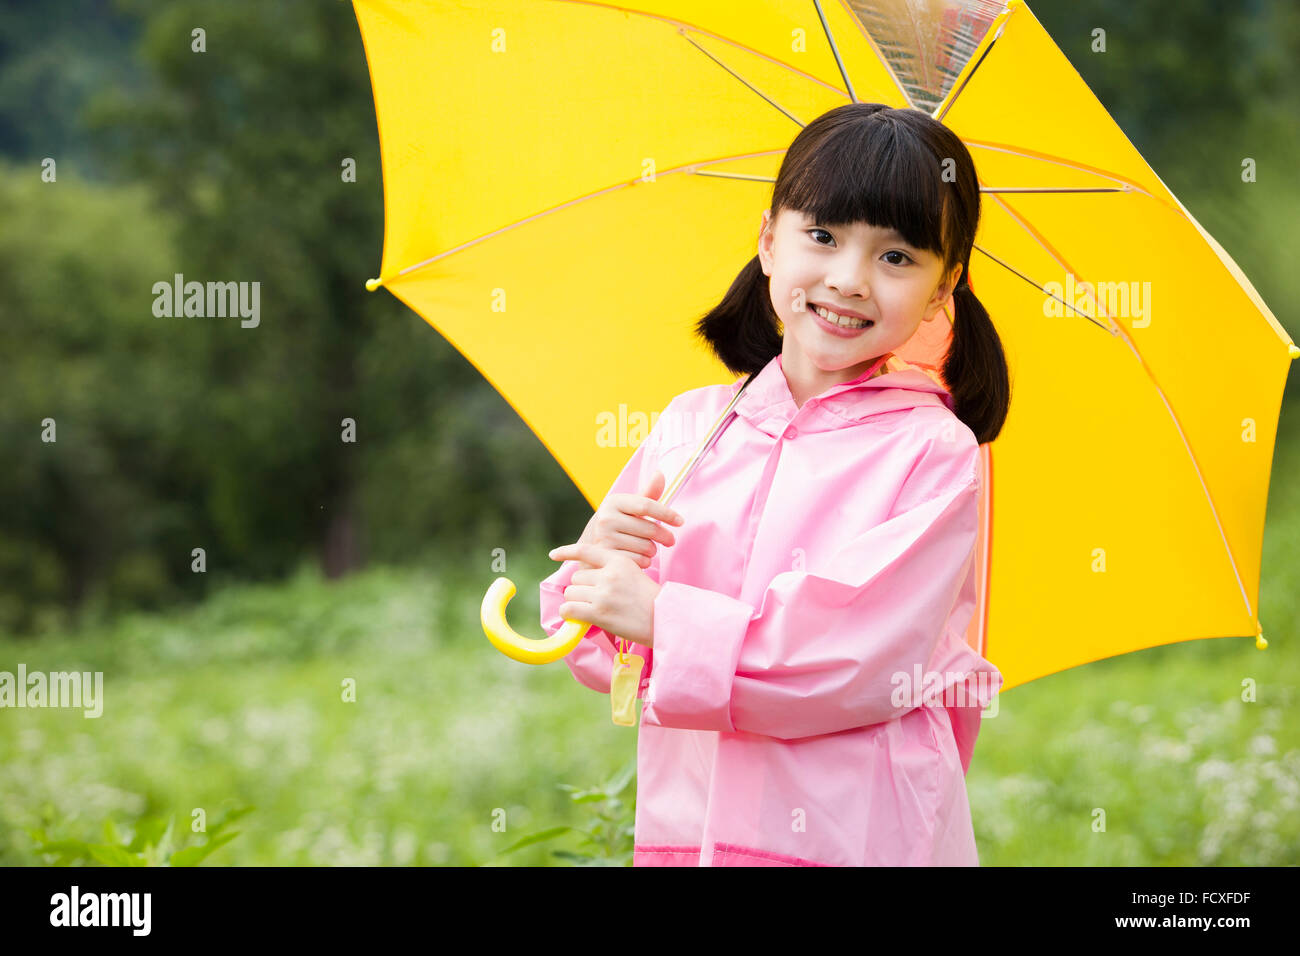 Girl in rain coat under an umbrella at field staring forward with a smile Stock Photo